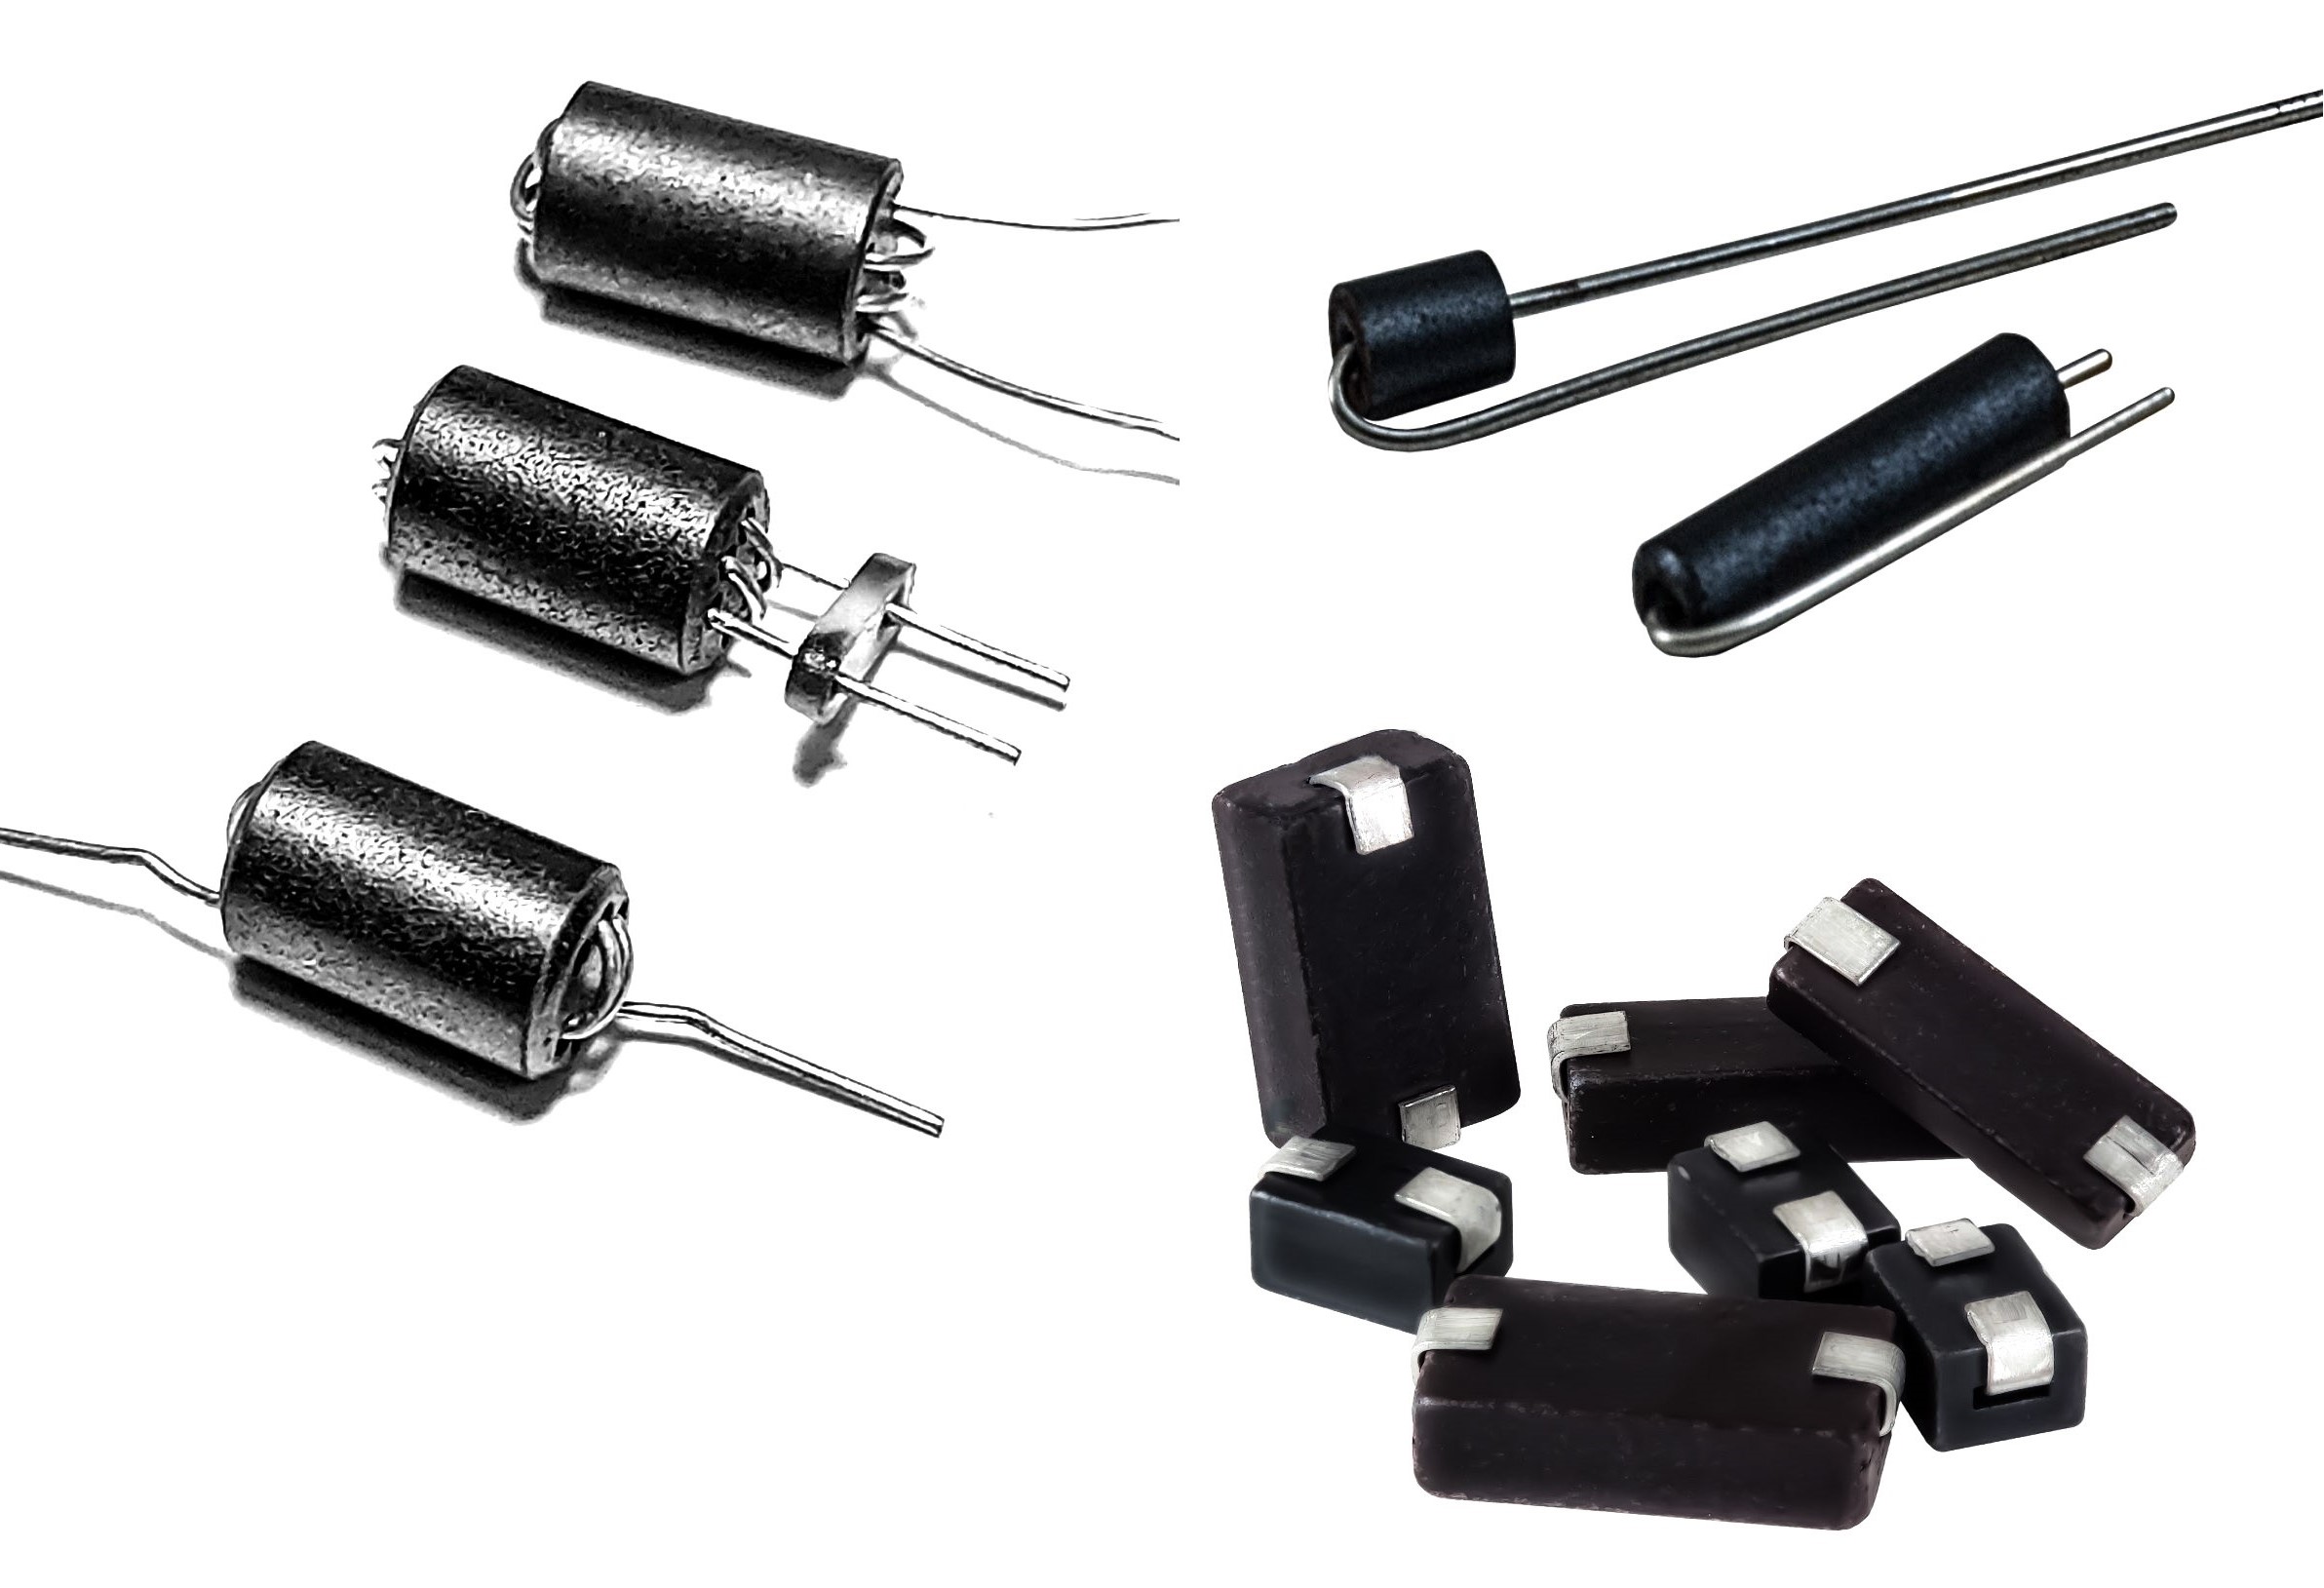 Ferrite Beads on Wire  Laird Performance Materials